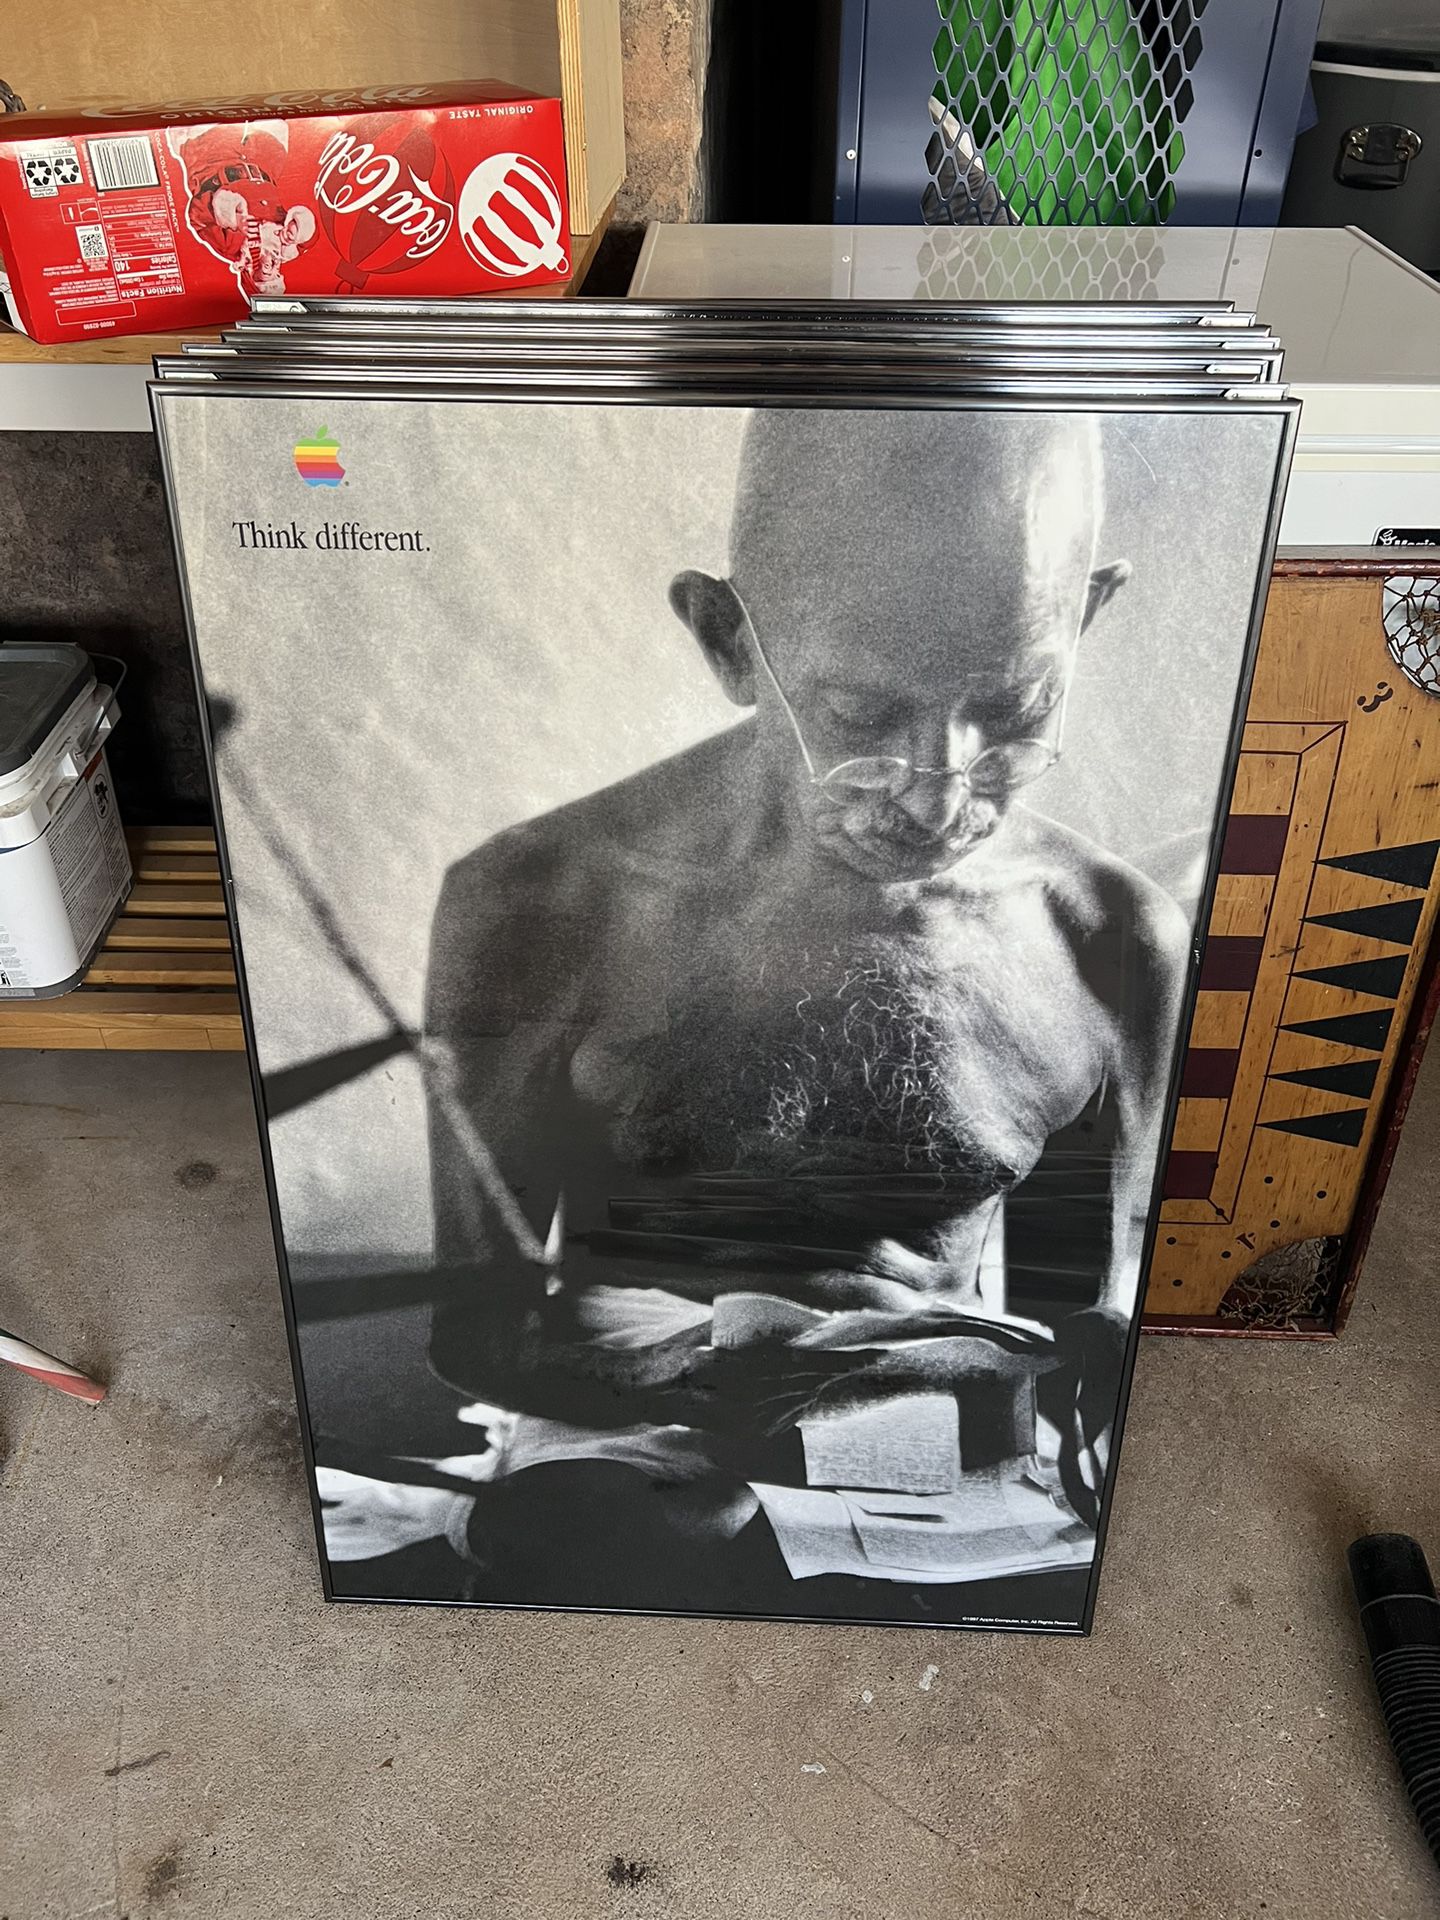 Apple ‘Think Differently’ Poster Gandhi 